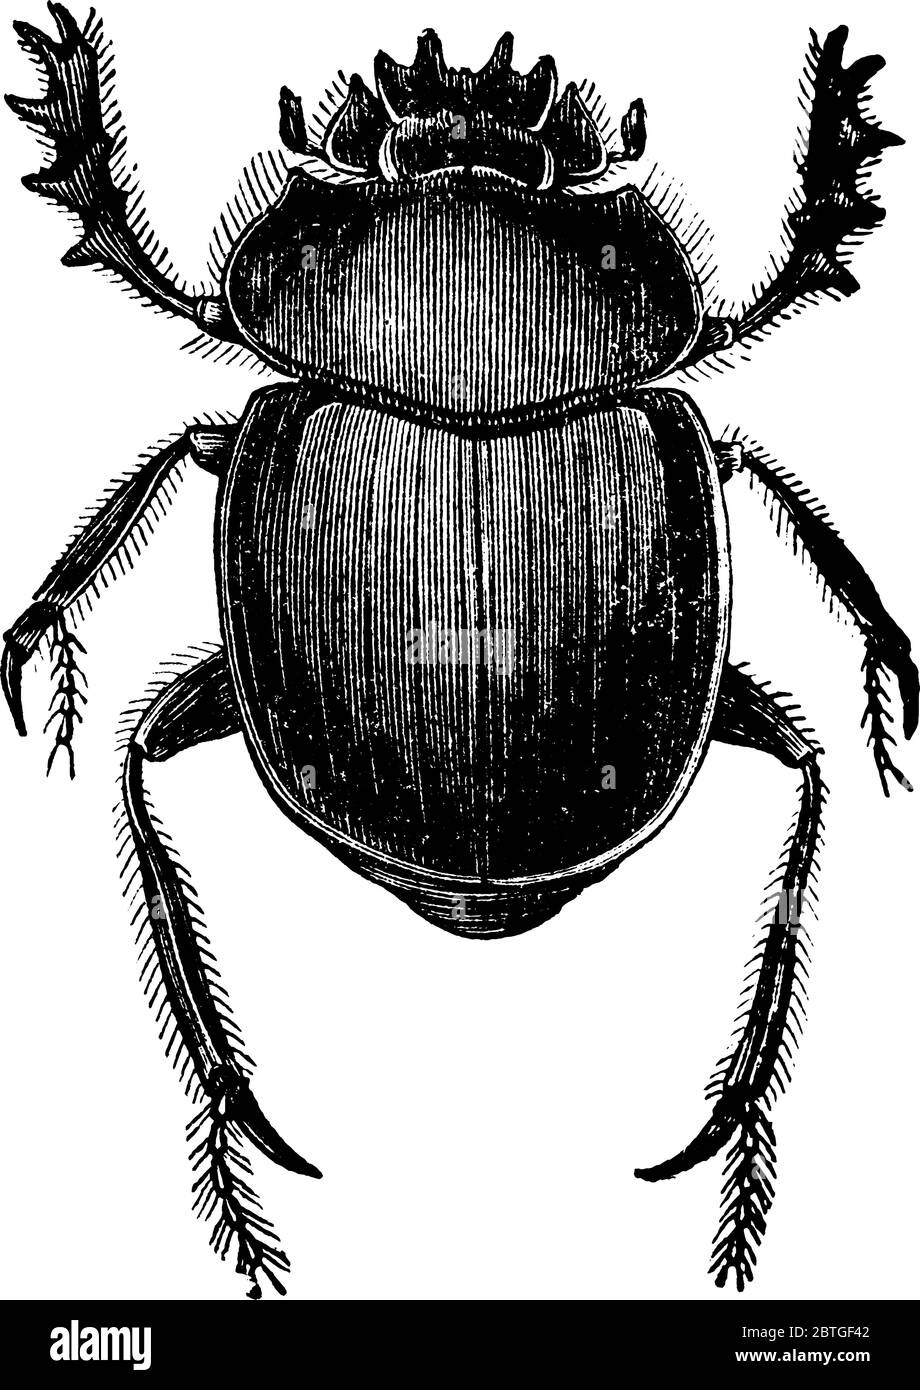 A typical representation of the dung beetle, an insect in the Scarabaeidae family. This insect was a sacred icon to the Egyptians, vintage line drawin Stock Vector